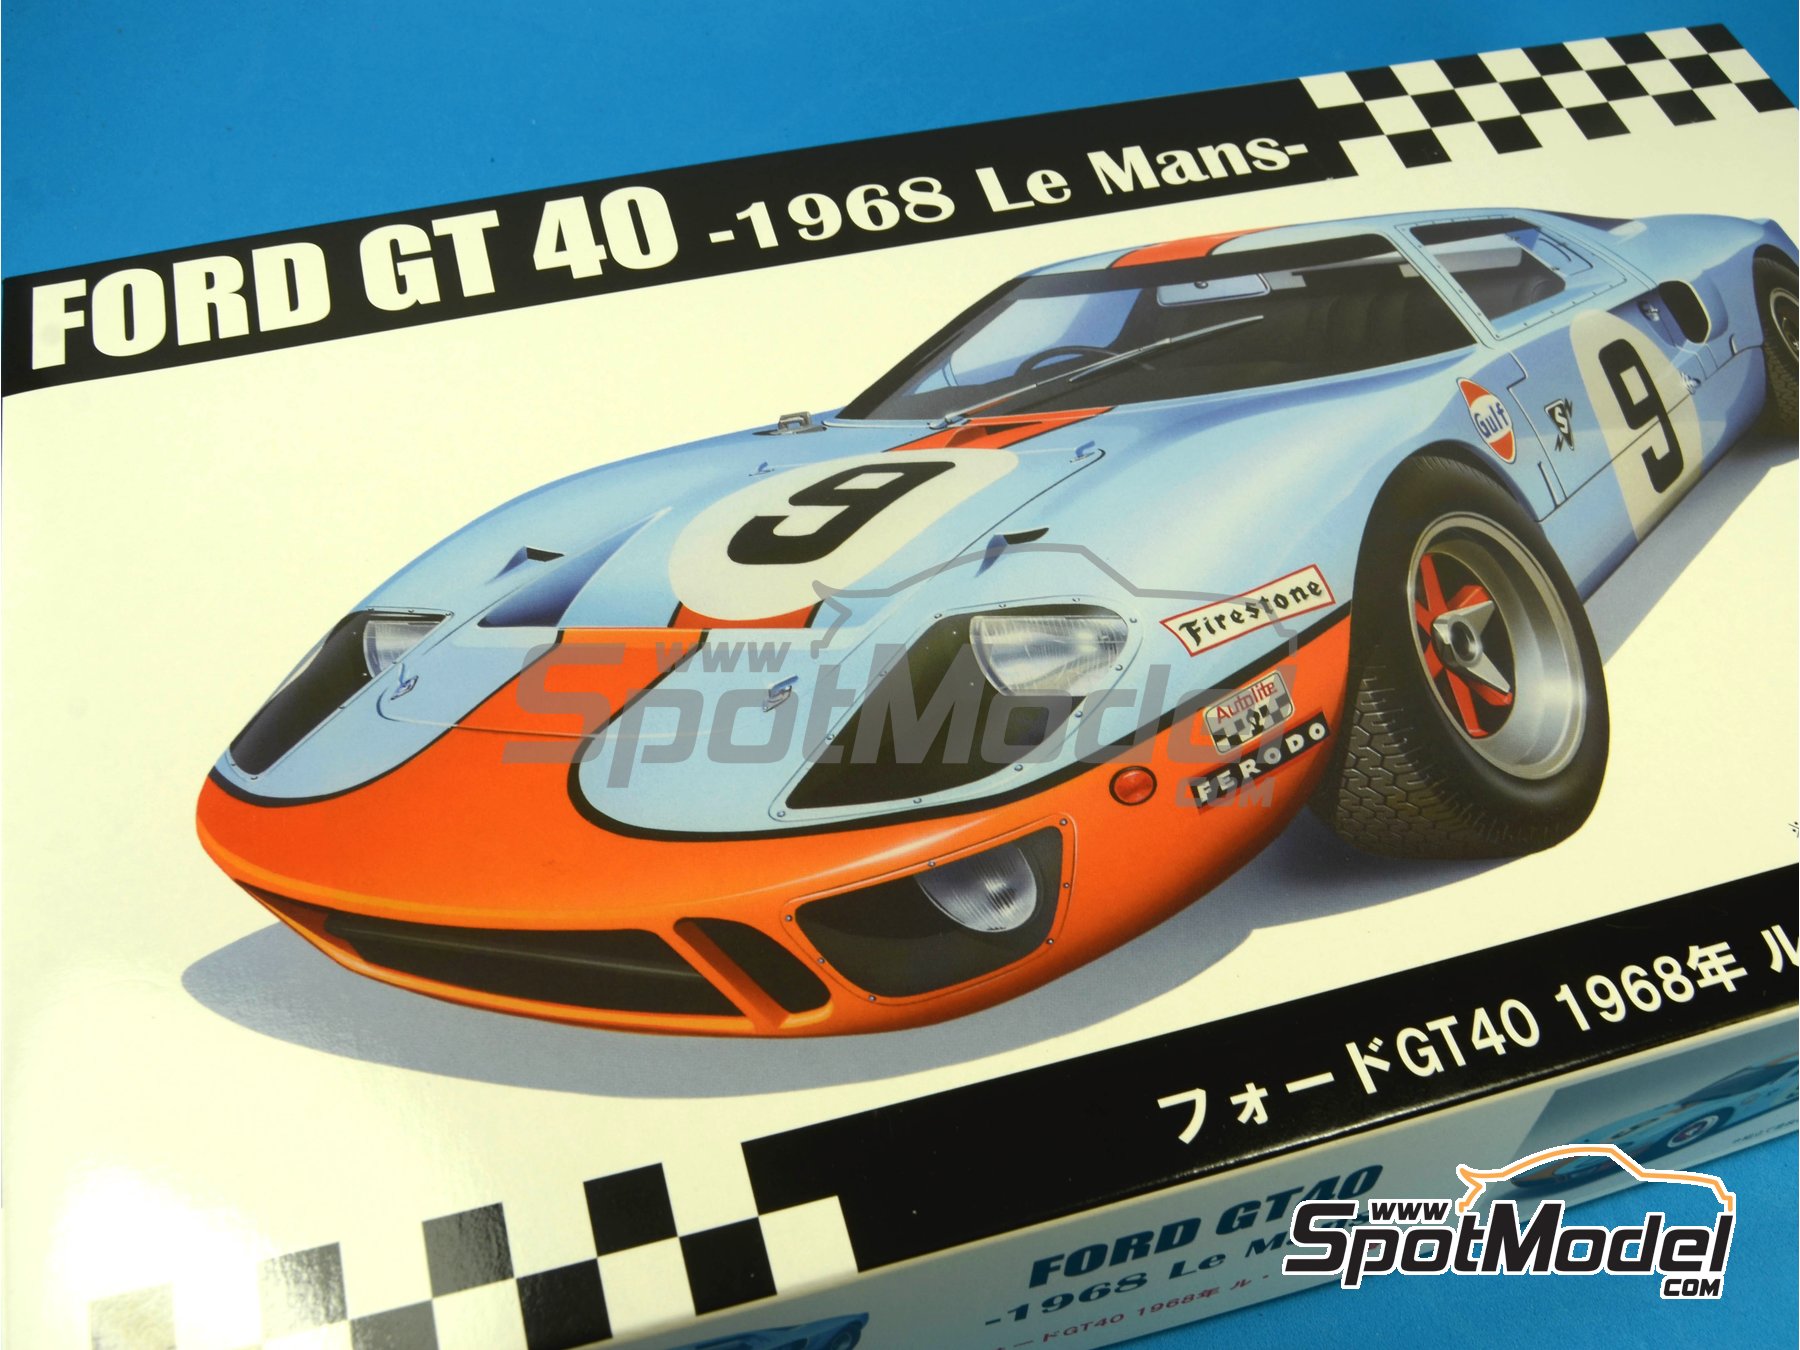 1967 Ford France GT40 Mk 1 Targa Florio water transfer decals for Fujimi kit 